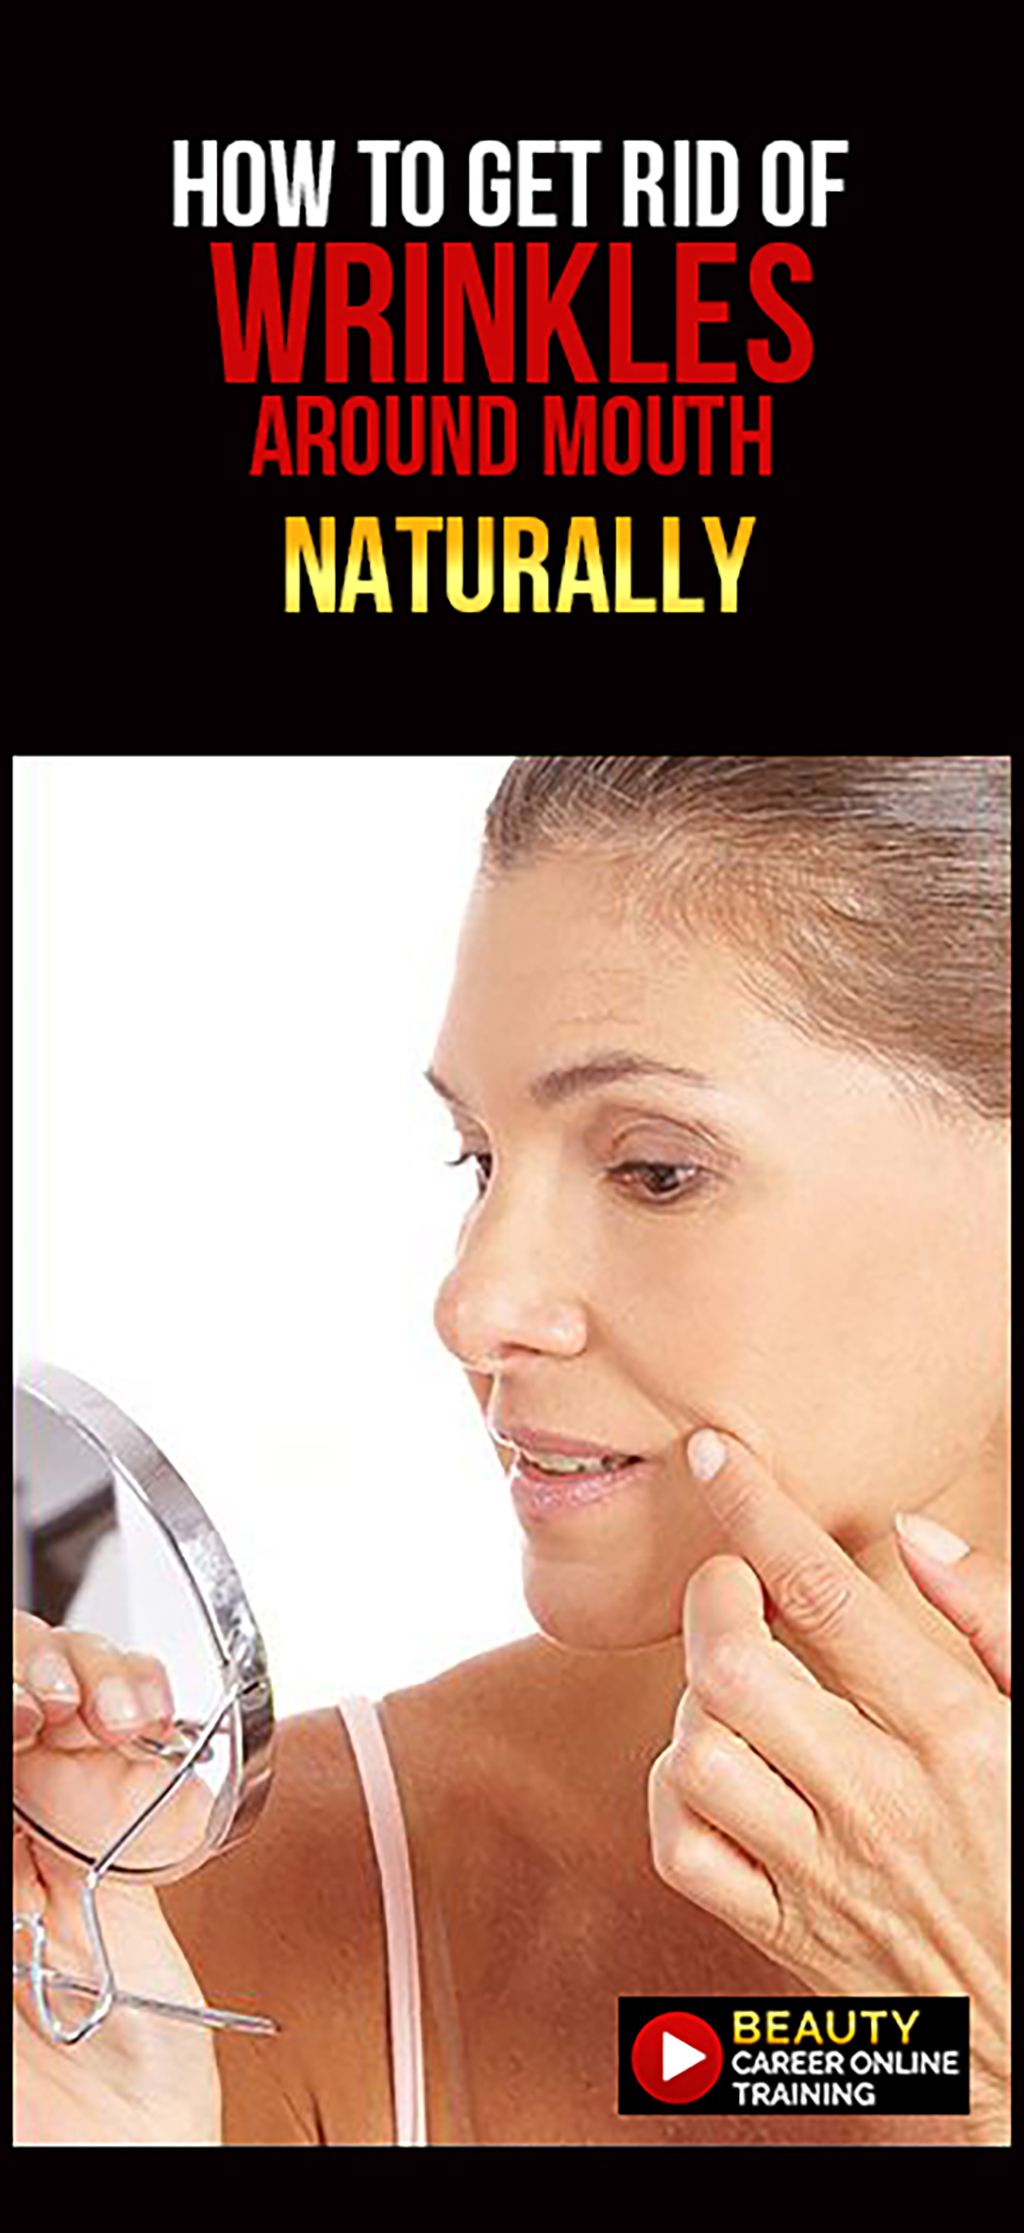 wrinkle, wrinkles around mouth, beauty course